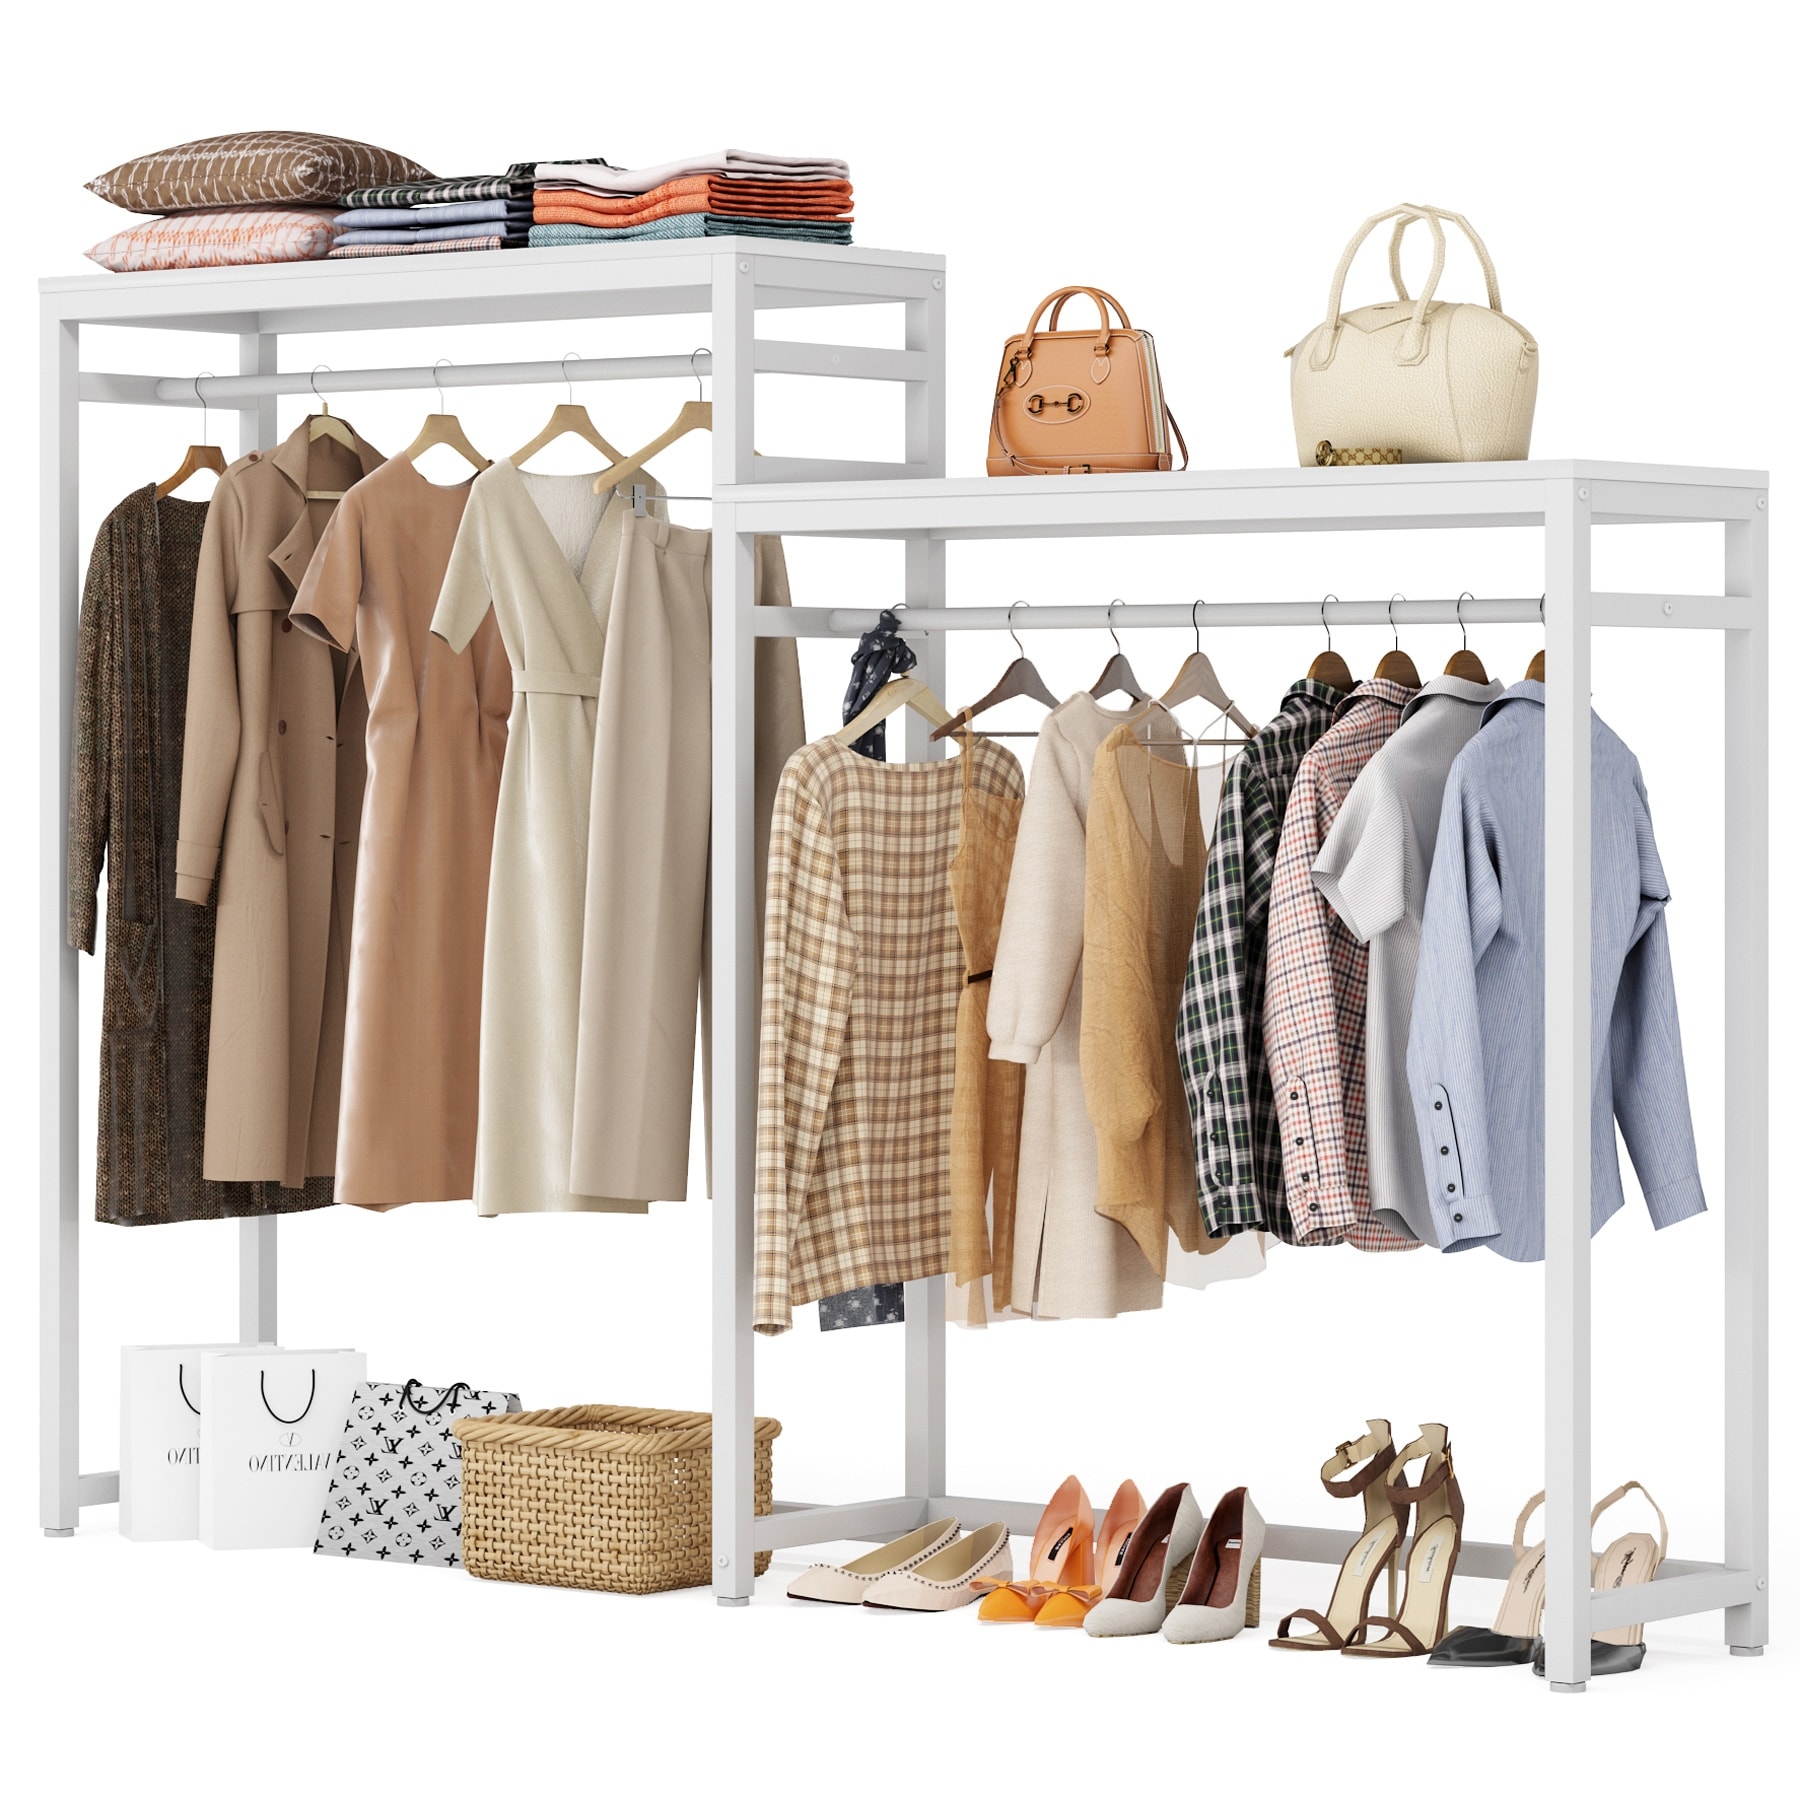 https://ak1.ostkcdn.com/images/products/is/images/direct/27bcdb0eec863fc638d605fec270edd1726cd4f7/Heavy-Duty-Metal-Clothes-Garment-Racks-with-Storage-Shelves-and-Double-Hanging-Rod%2CFree-Standing-Closet-Organizer.jpg